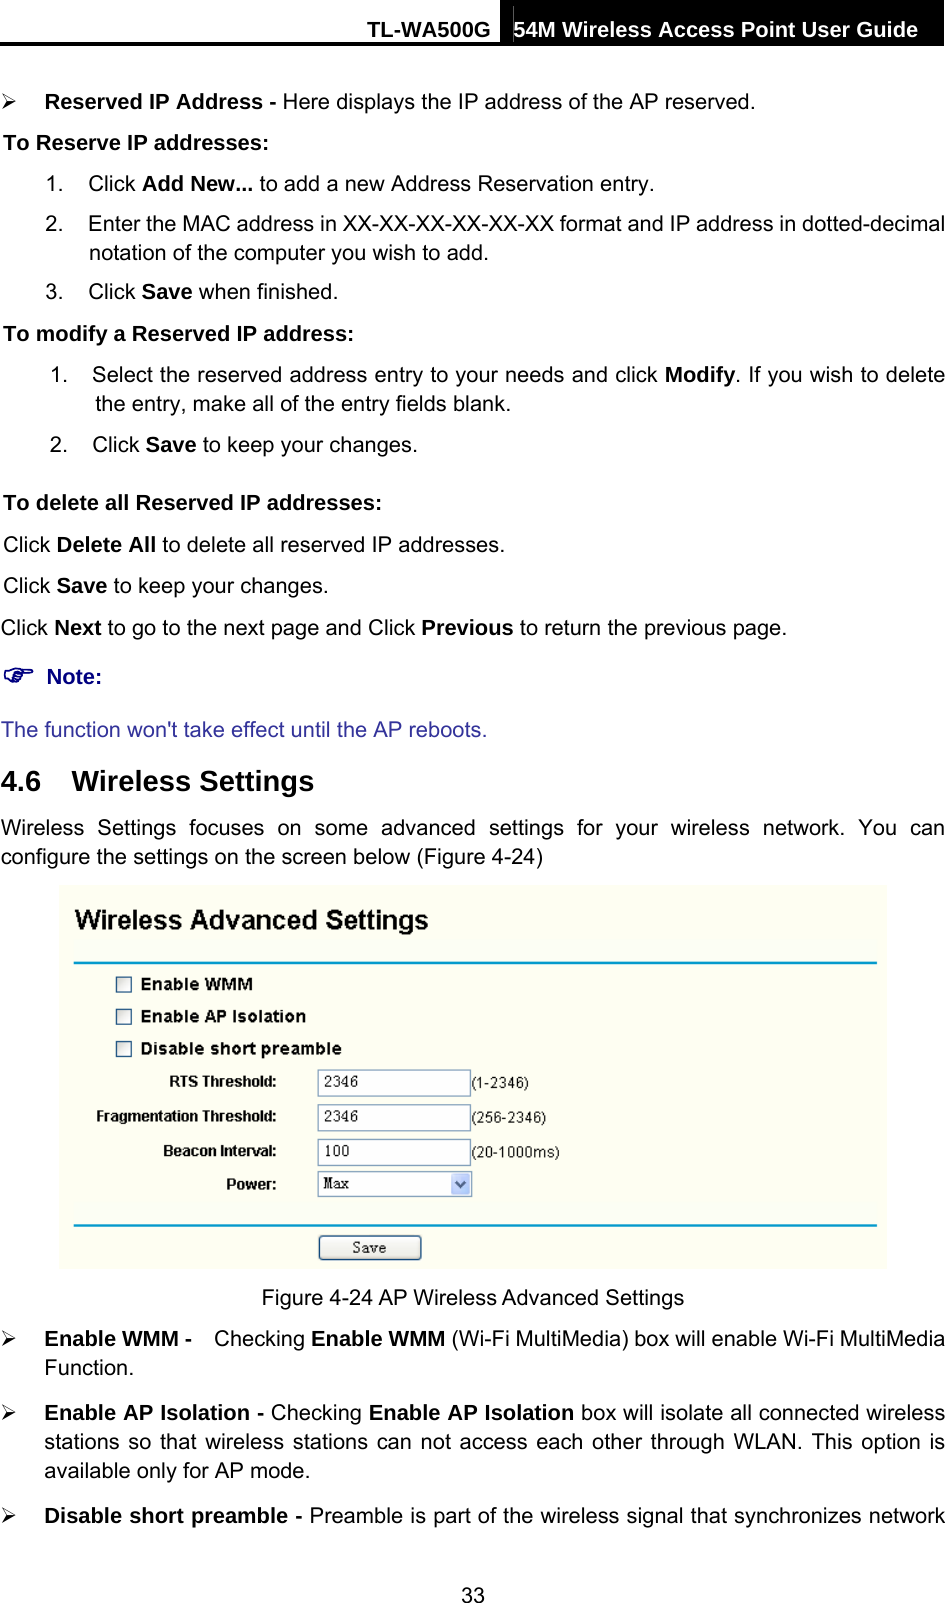 TL-WA500G 54M Wireless Access Point User Guide  ¾ Reserved IP Address - Here displays the IP address of the AP reserved. To Reserve IP addresses: 1. Click Add New... to add a new Address Reservation entry. 2.  Enter the MAC address in XX-XX-XX-XX-XX-XX format and IP address in dotted-decimal notation of the computer you wish to add. 3. Click Save when finished. To modify a Reserved IP address: 1.  Select the reserved address entry to your needs and click Modify. If you wish to delete the entry, make all of the entry fields blank. 2. Click Save to keep your changes. To delete all Reserved IP addresses: Click Delete All to delete all reserved IP addresses. Click Save to keep your changes. Click Next to go to the next page and Click Previous to return the previous page. ) Note: The function won&apos;t take effect until the AP reboots. 4.6  Wireless Settings Wireless Settings focuses on some advanced settings for your wireless network. You can configure the settings on the screen below (Figure 4-24)  Figure 4-24 AP Wireless Advanced Settings ¾ Enable WMM -    Checking Enable WMM (Wi-Fi MultiMedia) box will enable Wi-Fi MultiMedia Function. ¾ Enable AP Isolation - Checking Enable AP Isolation box will isolate all connected wireless stations so that wireless stations can not access each other through WLAN. This option is available only for AP mode. ¾ Disable short preamble - Preamble is part of the wireless signal that synchronizes network 33 